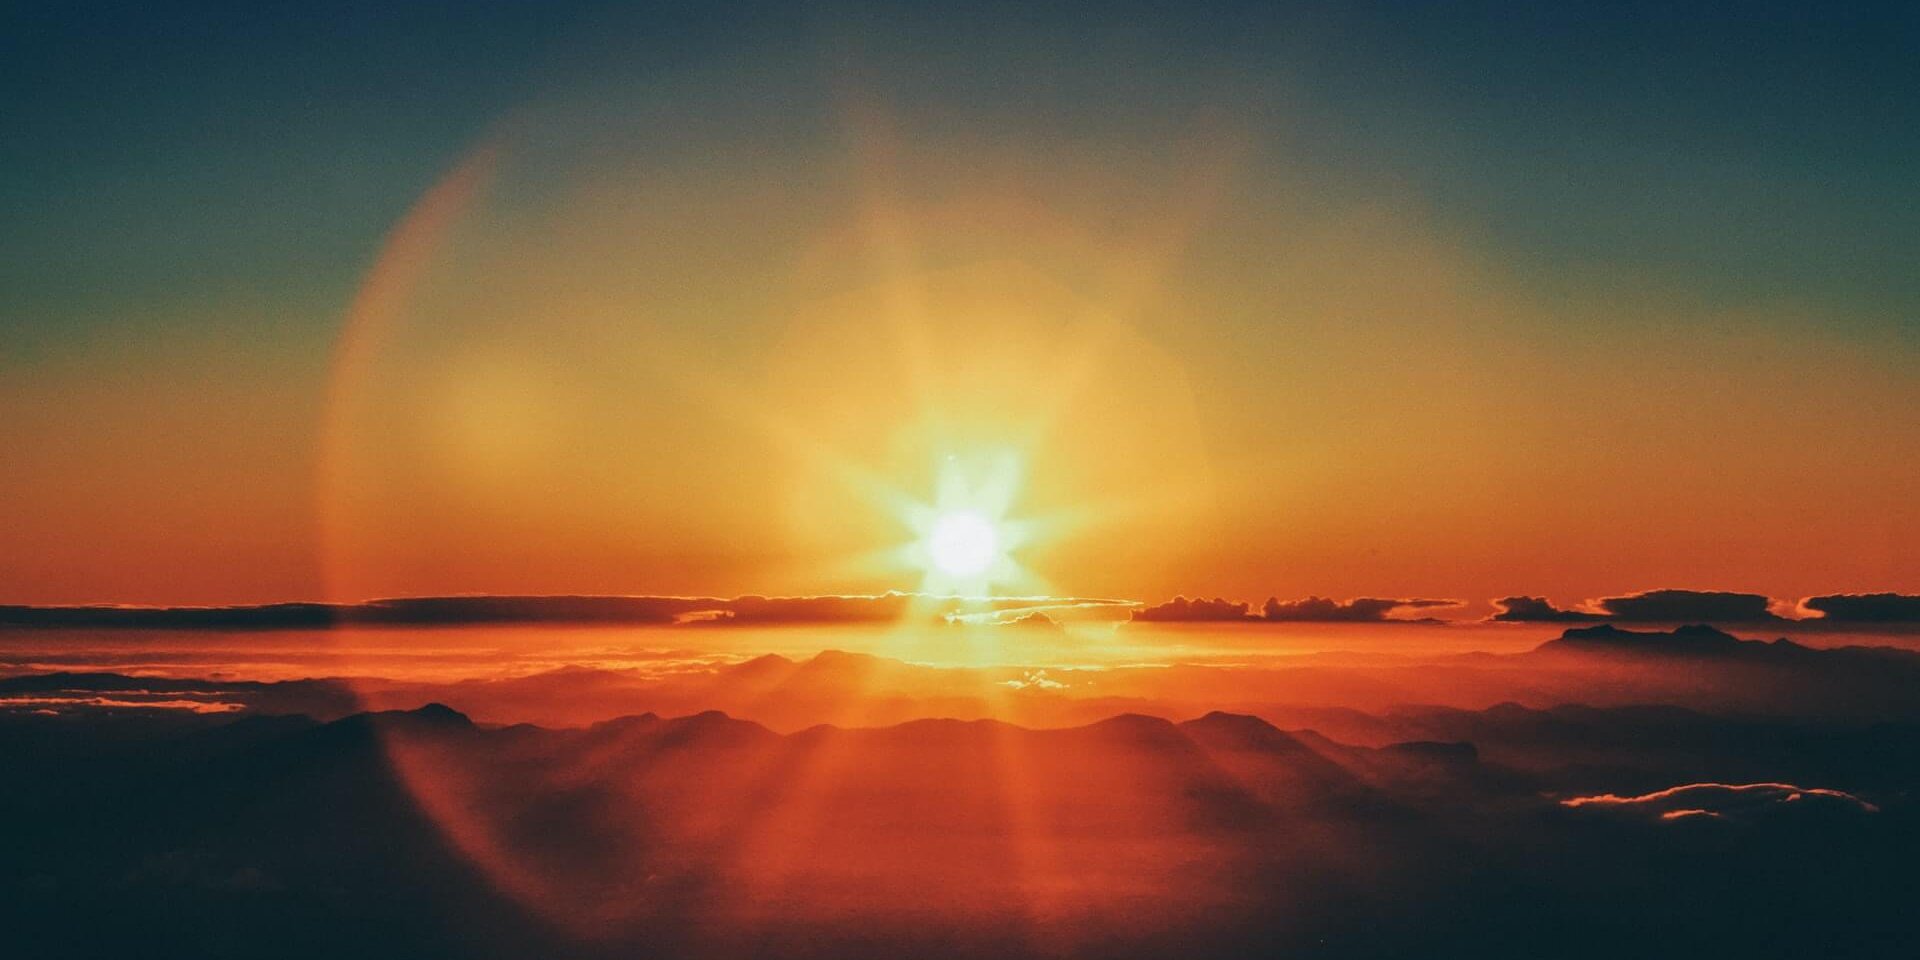 Sun rising over clouds